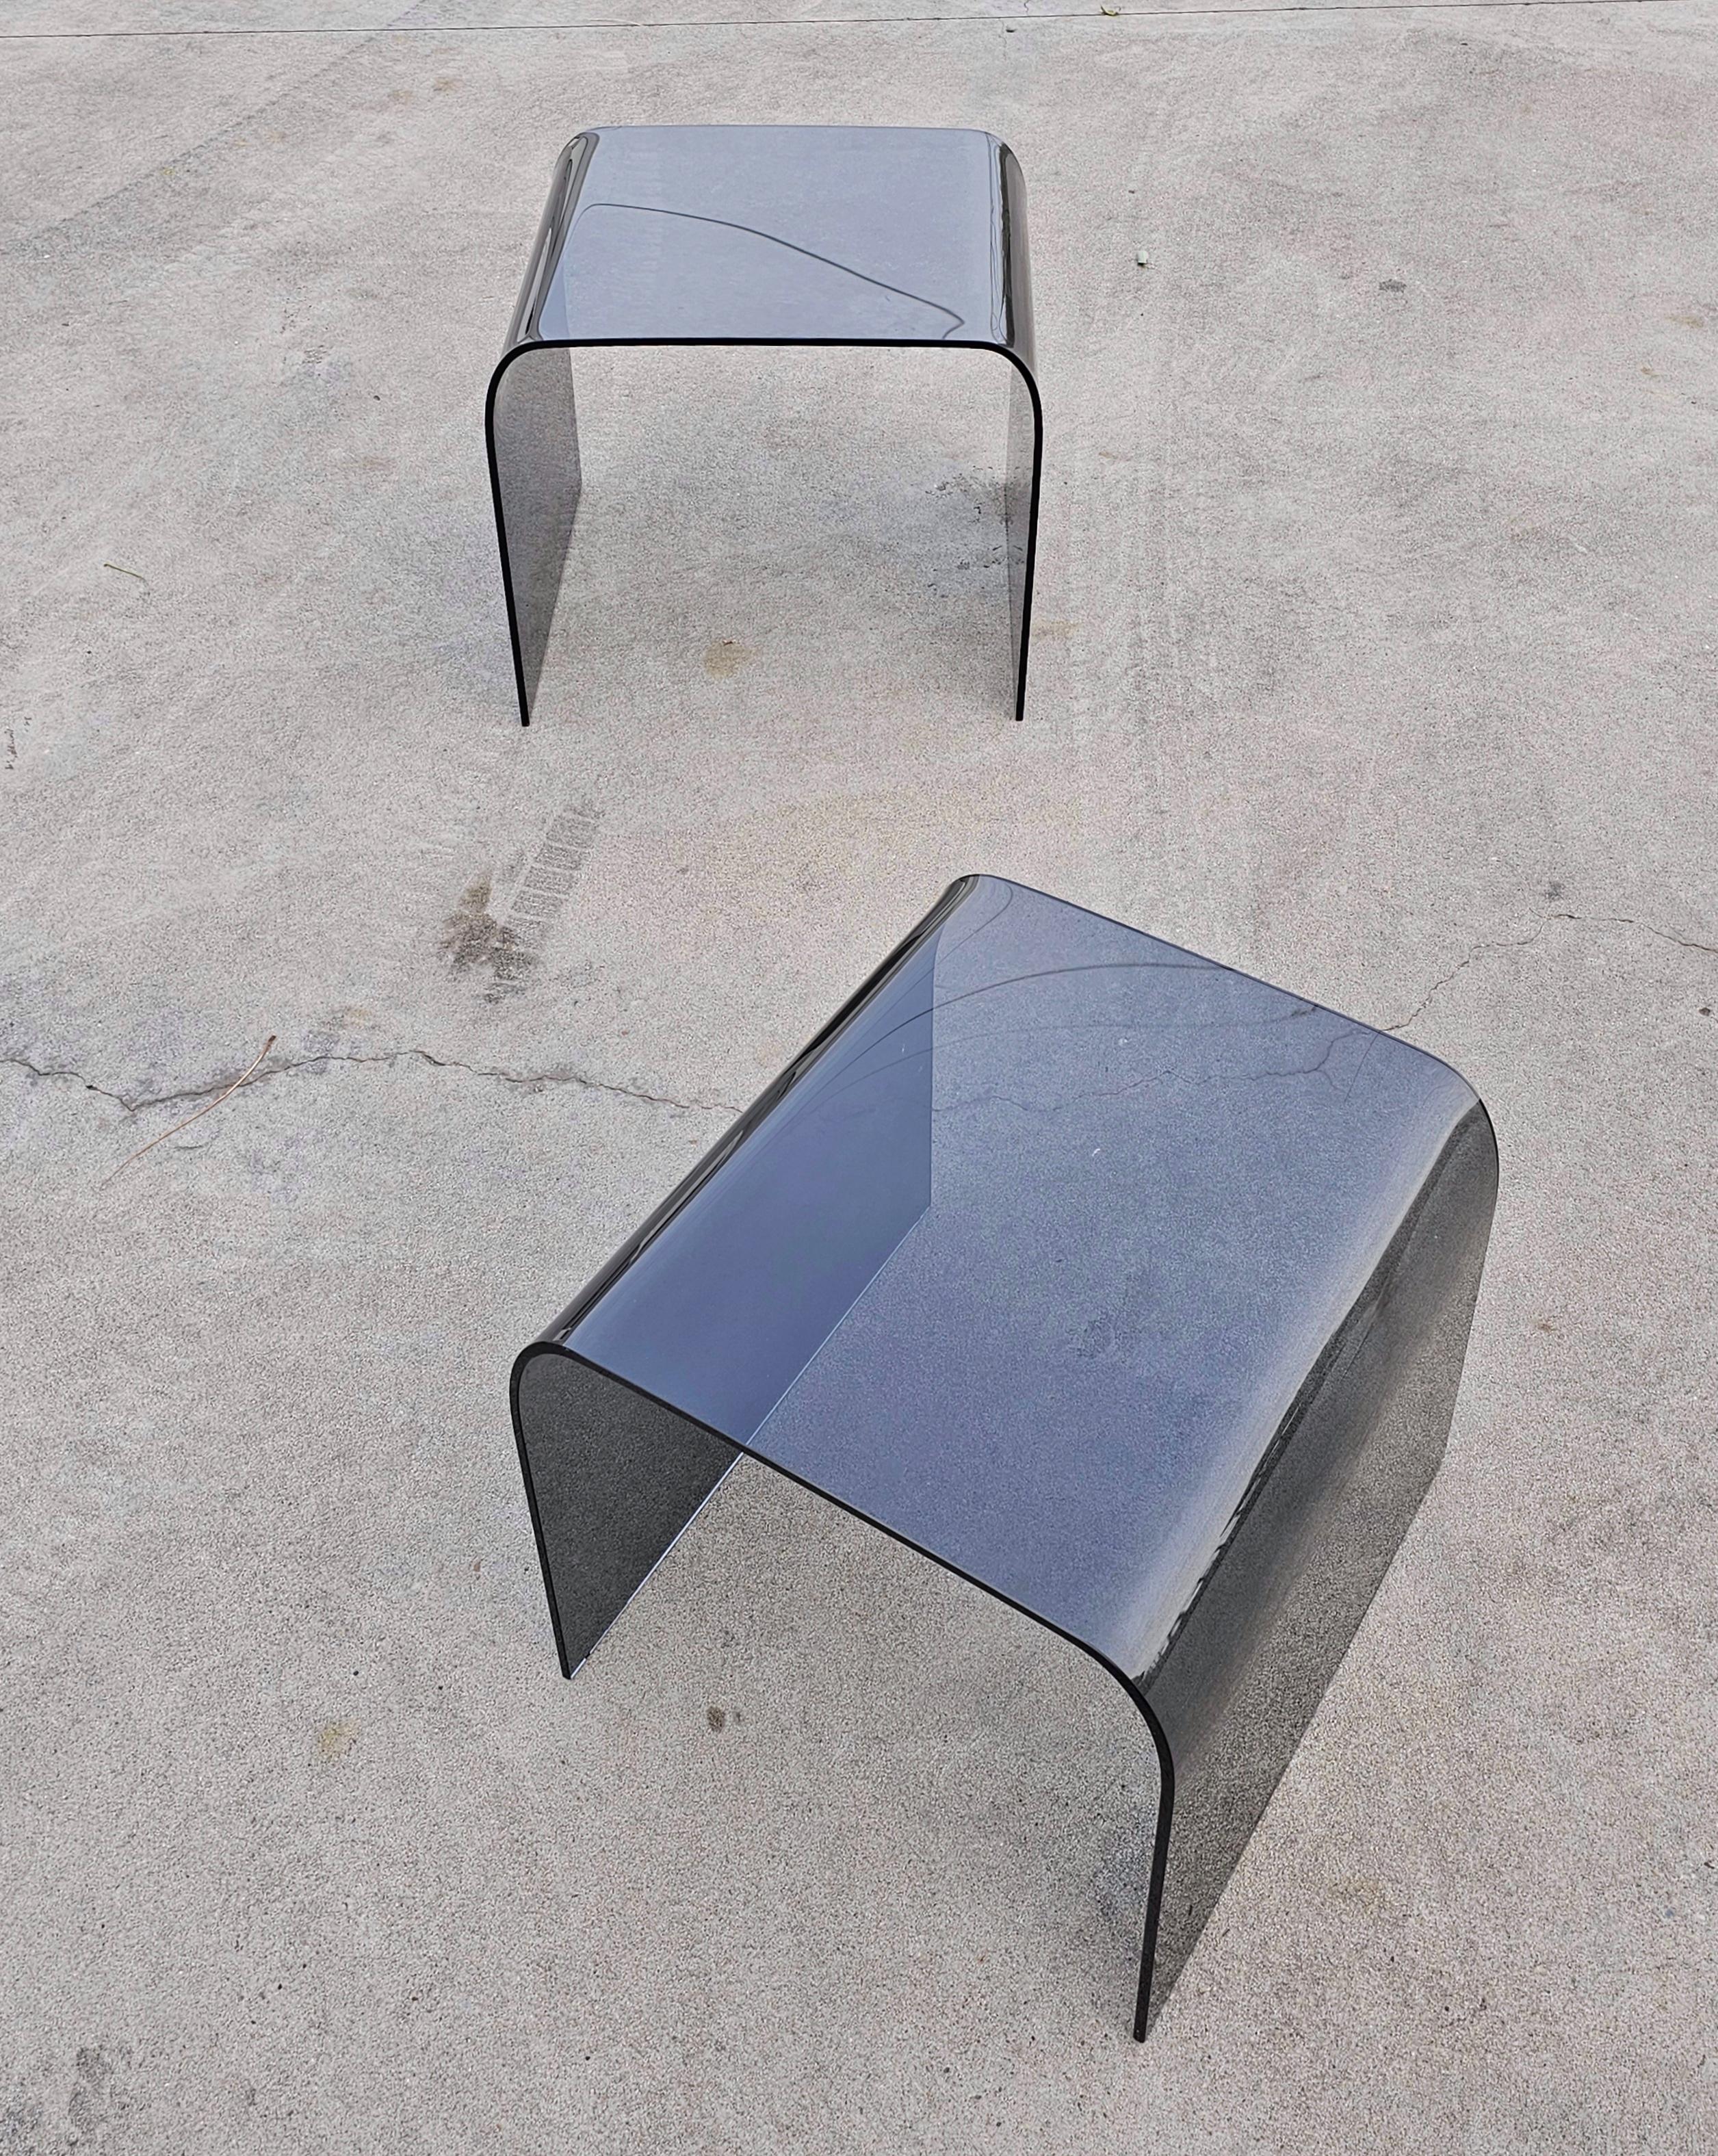 In this listing you will find a pair of Waterfall Nesting Side Tables attributed to Fiam. They are made of tinted, gray glass. Fitting one under the other, they don't take up much space and due to their minimalist design they fit very well with any